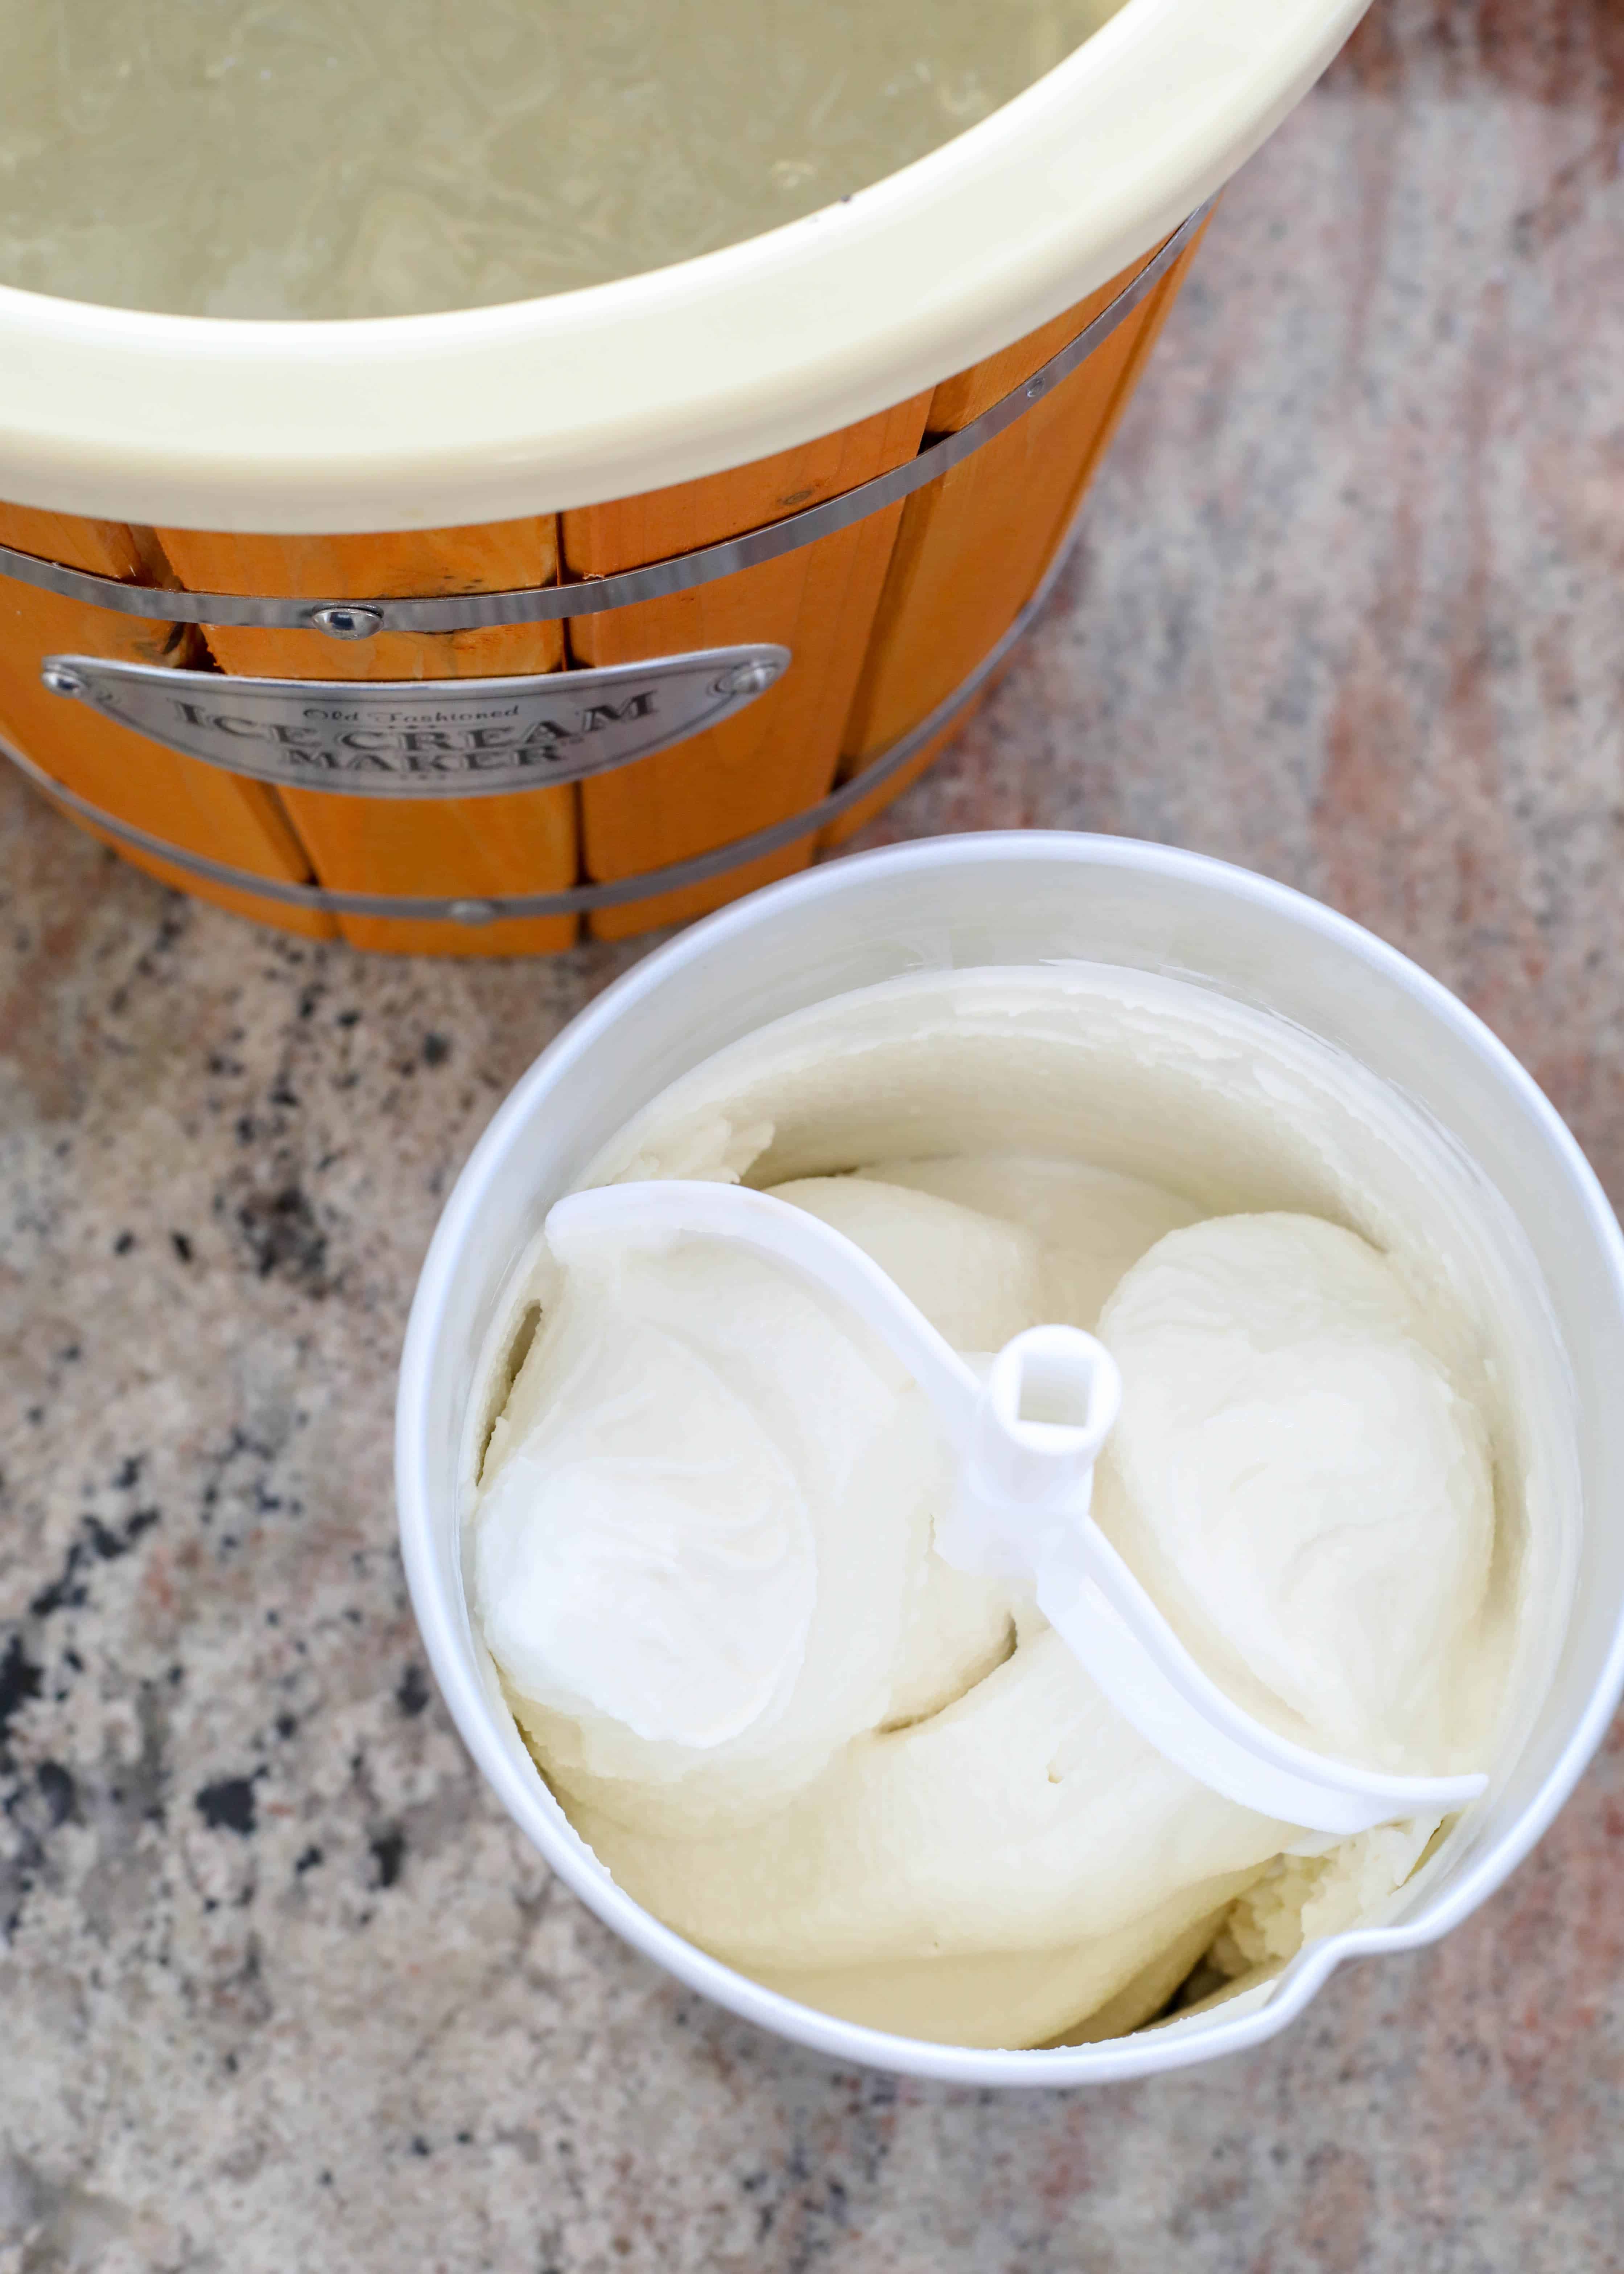 The Best Ice Cream Makers For Kids To Churn Out Their Favorite